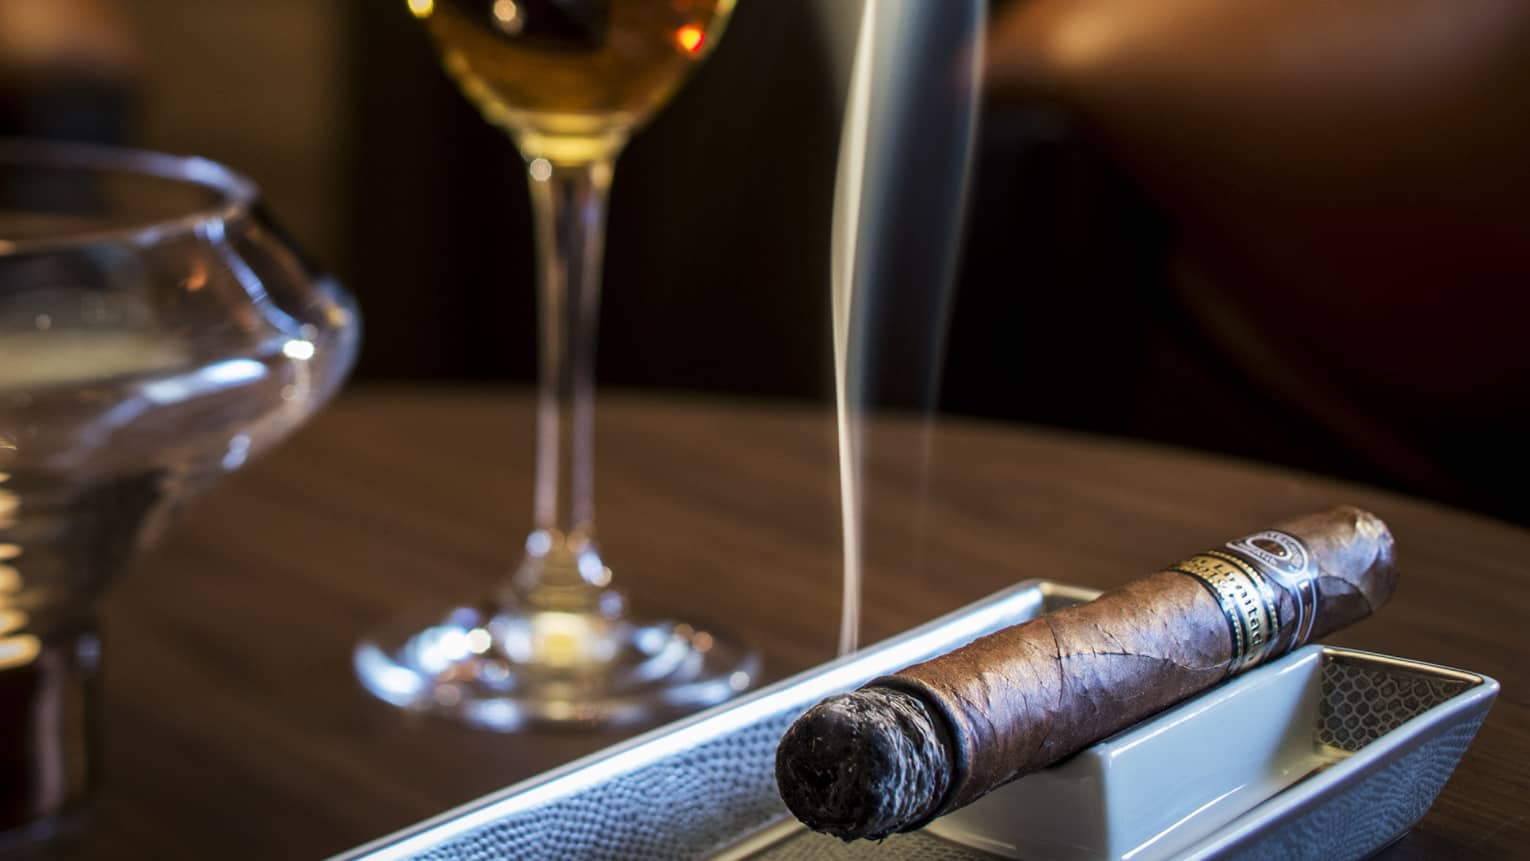 Smoking cigar on tray under glass with liquor